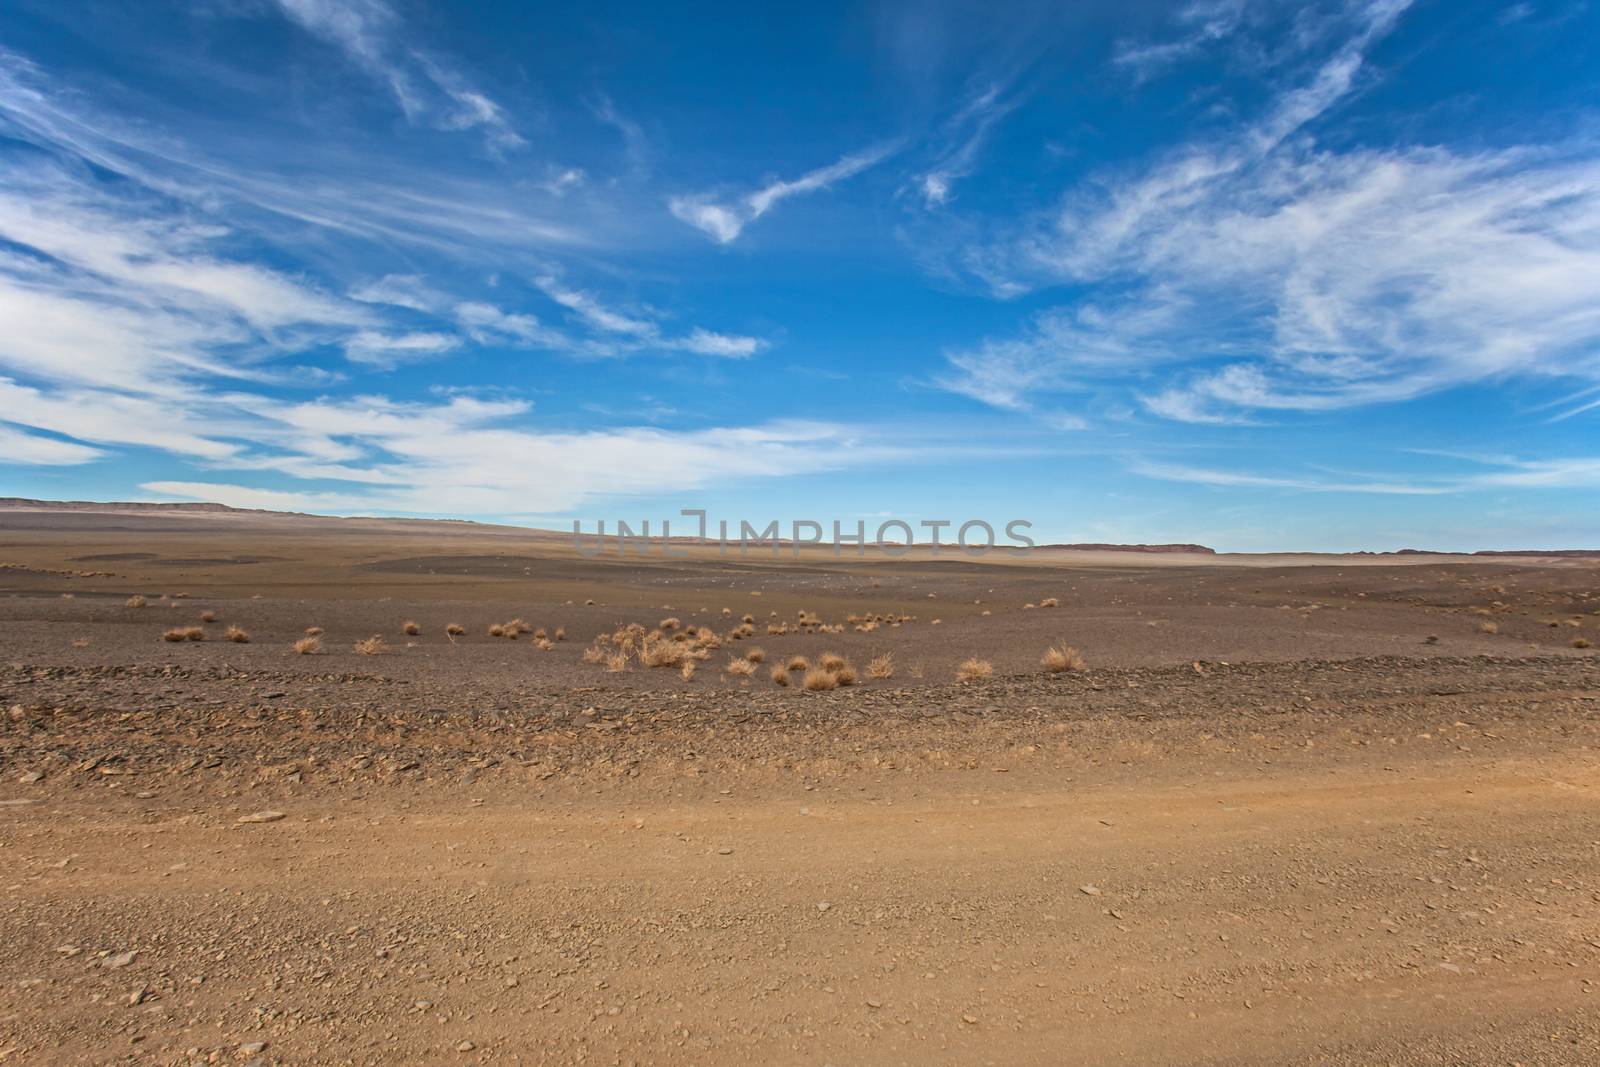 A desolate desert landscape in Southern Namibia, close to the hamlet of Aussenkehr.